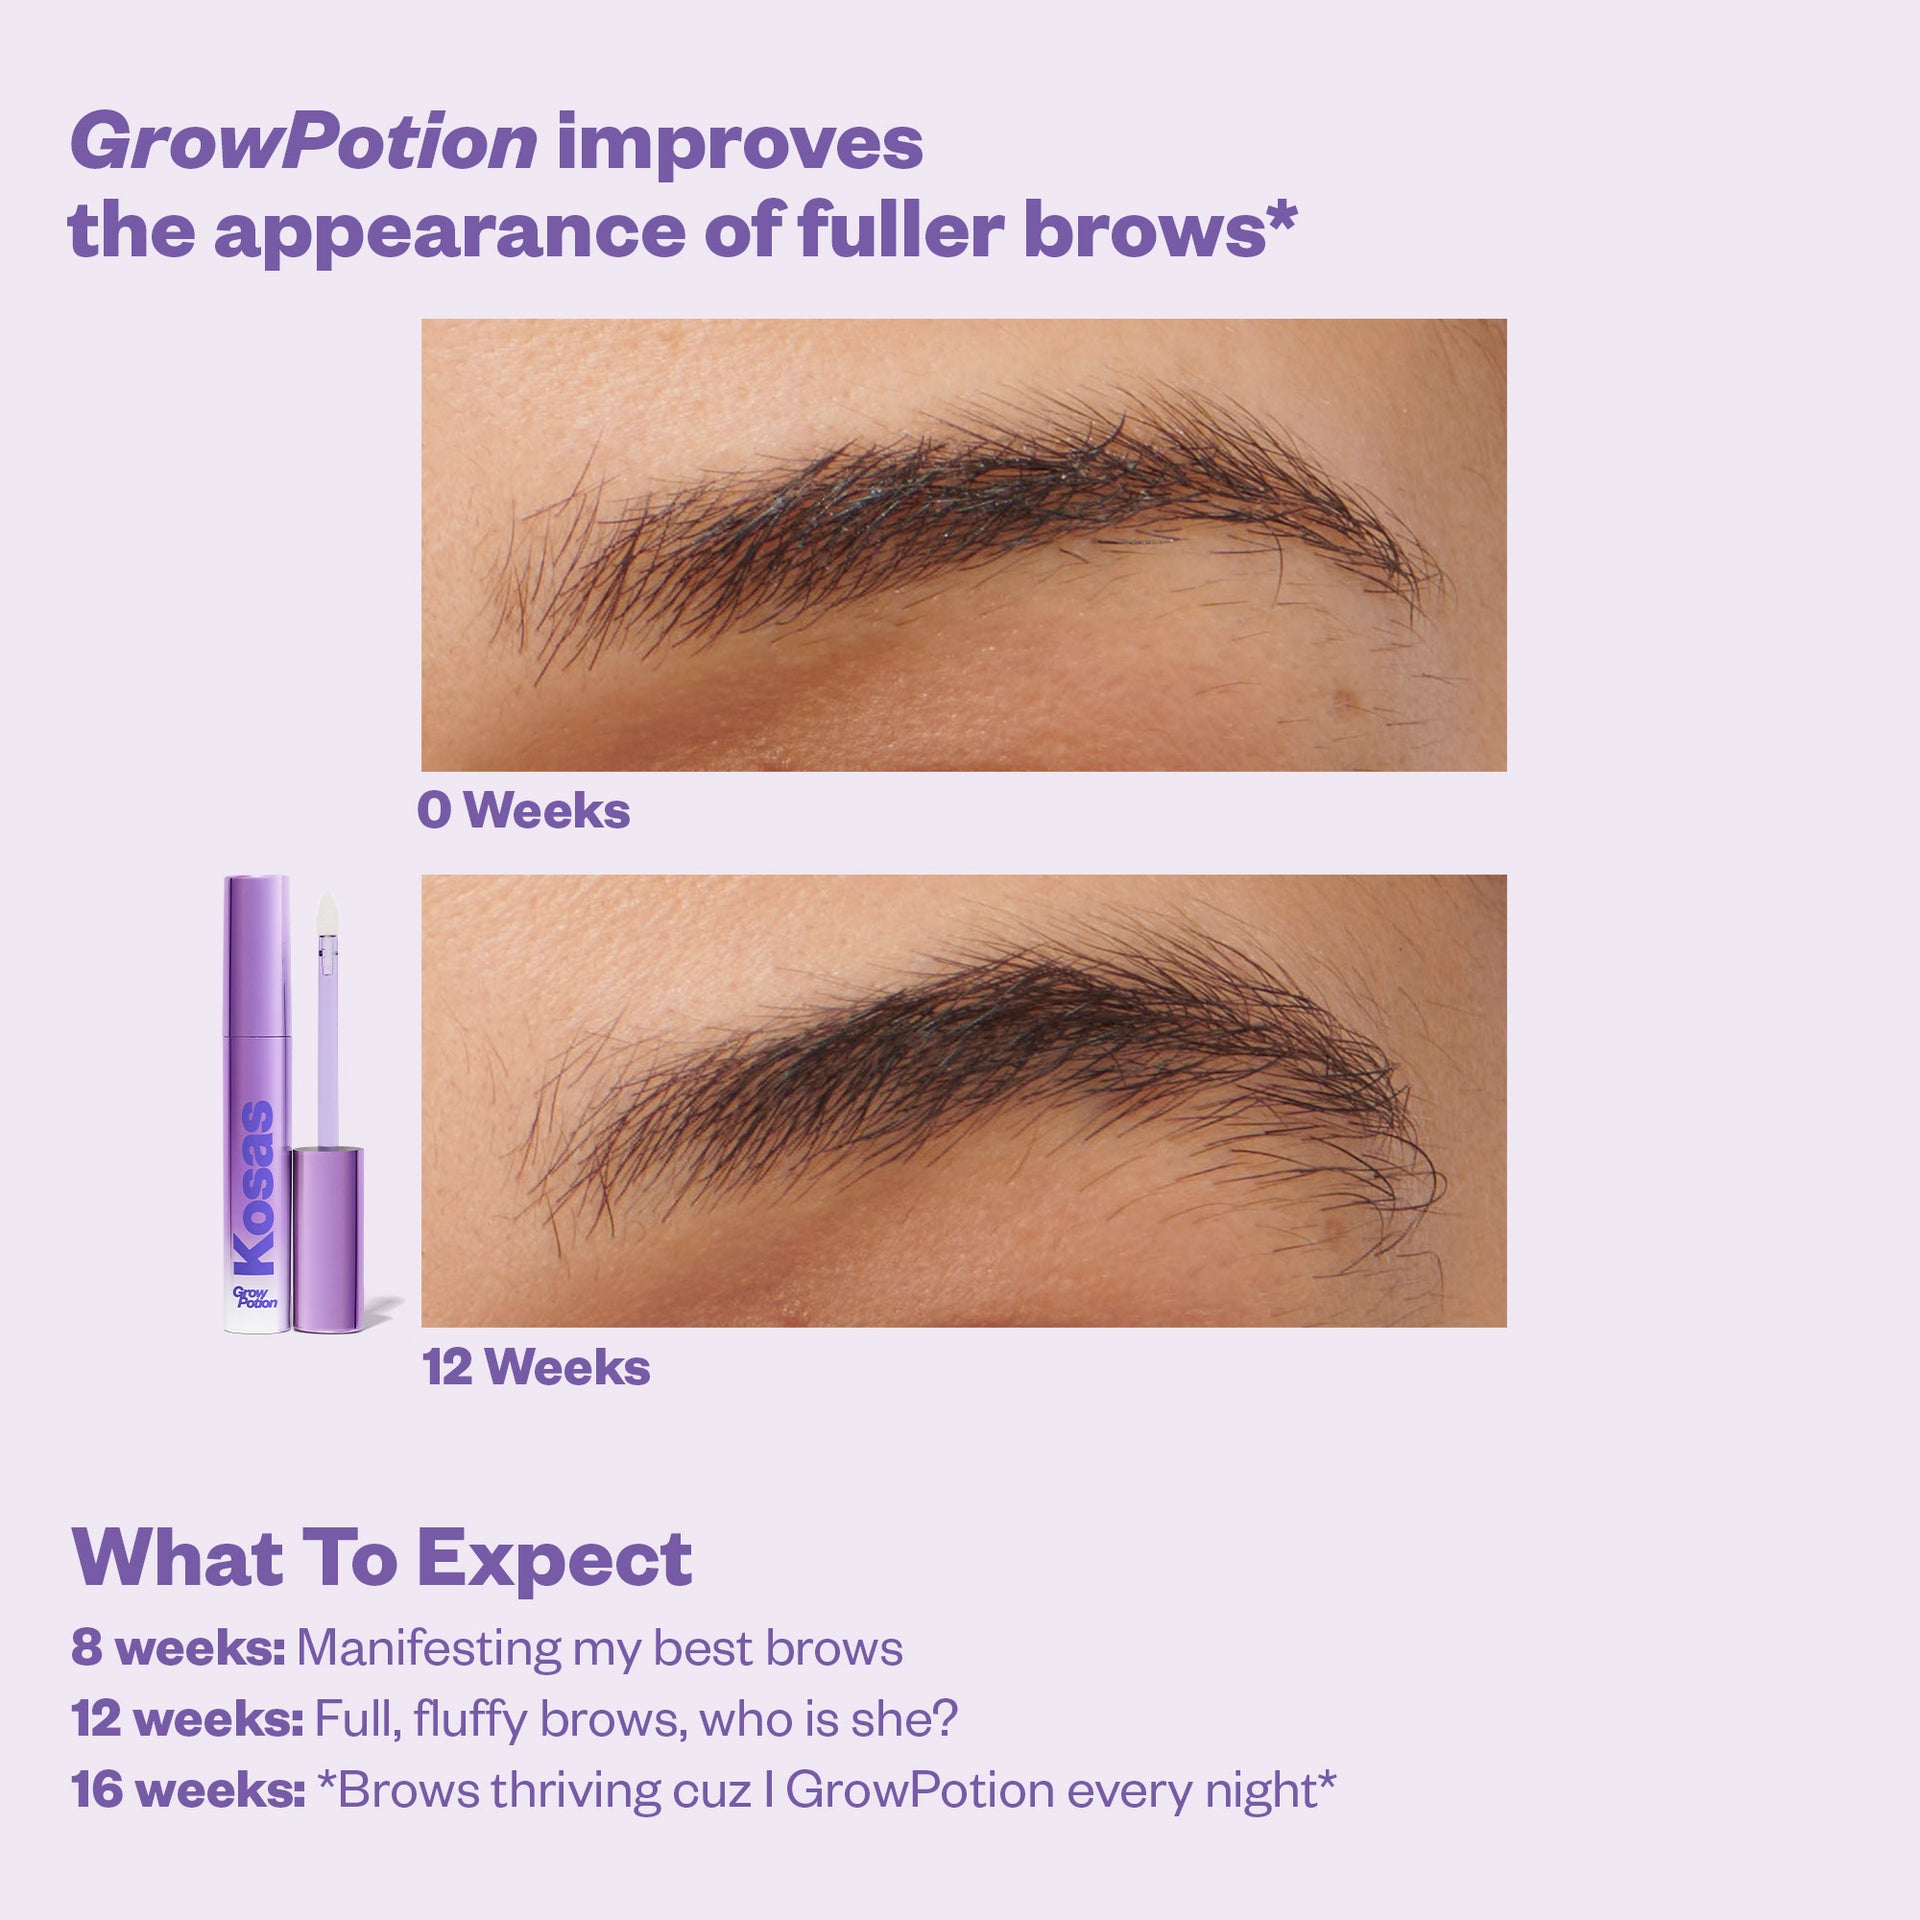 Image illustrating the progressive improvement of brow fullness from 0 to 12 weeks of using GrowPotion, demonstrating its remarkable effectiveness in brow growth.